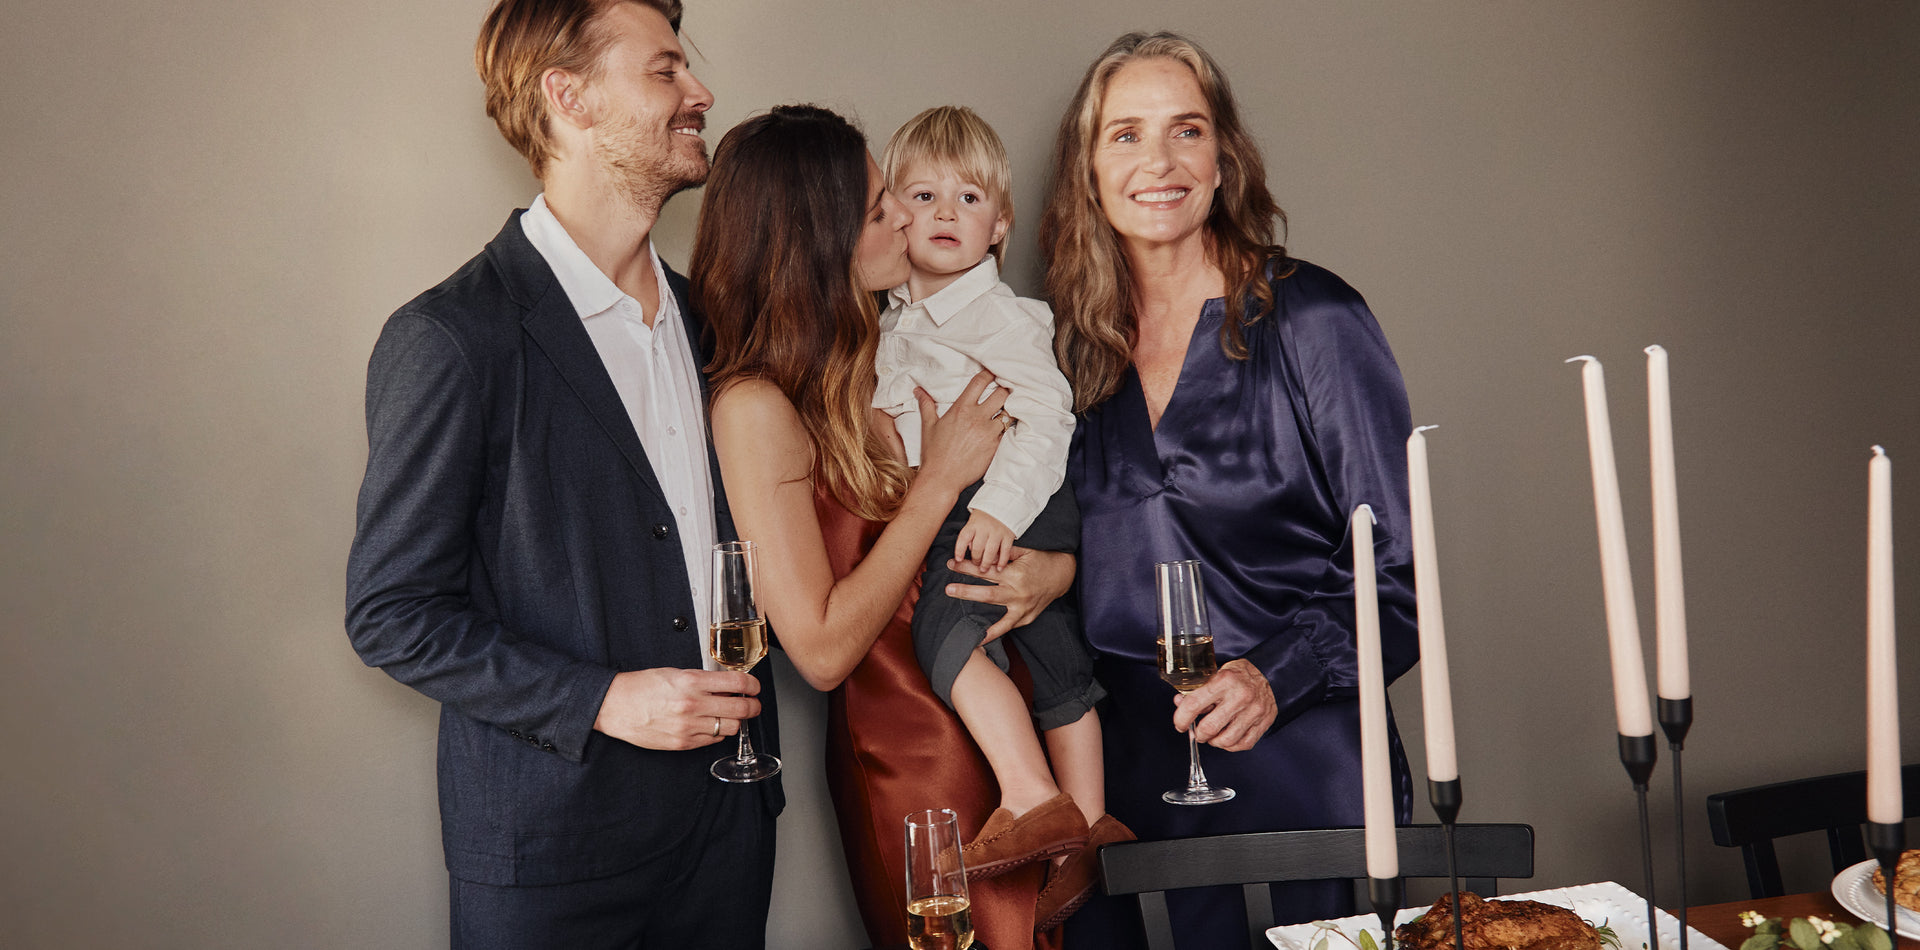 EDITORIAL IMAGE OF FAMILY AT A HOLIDAY PARTY